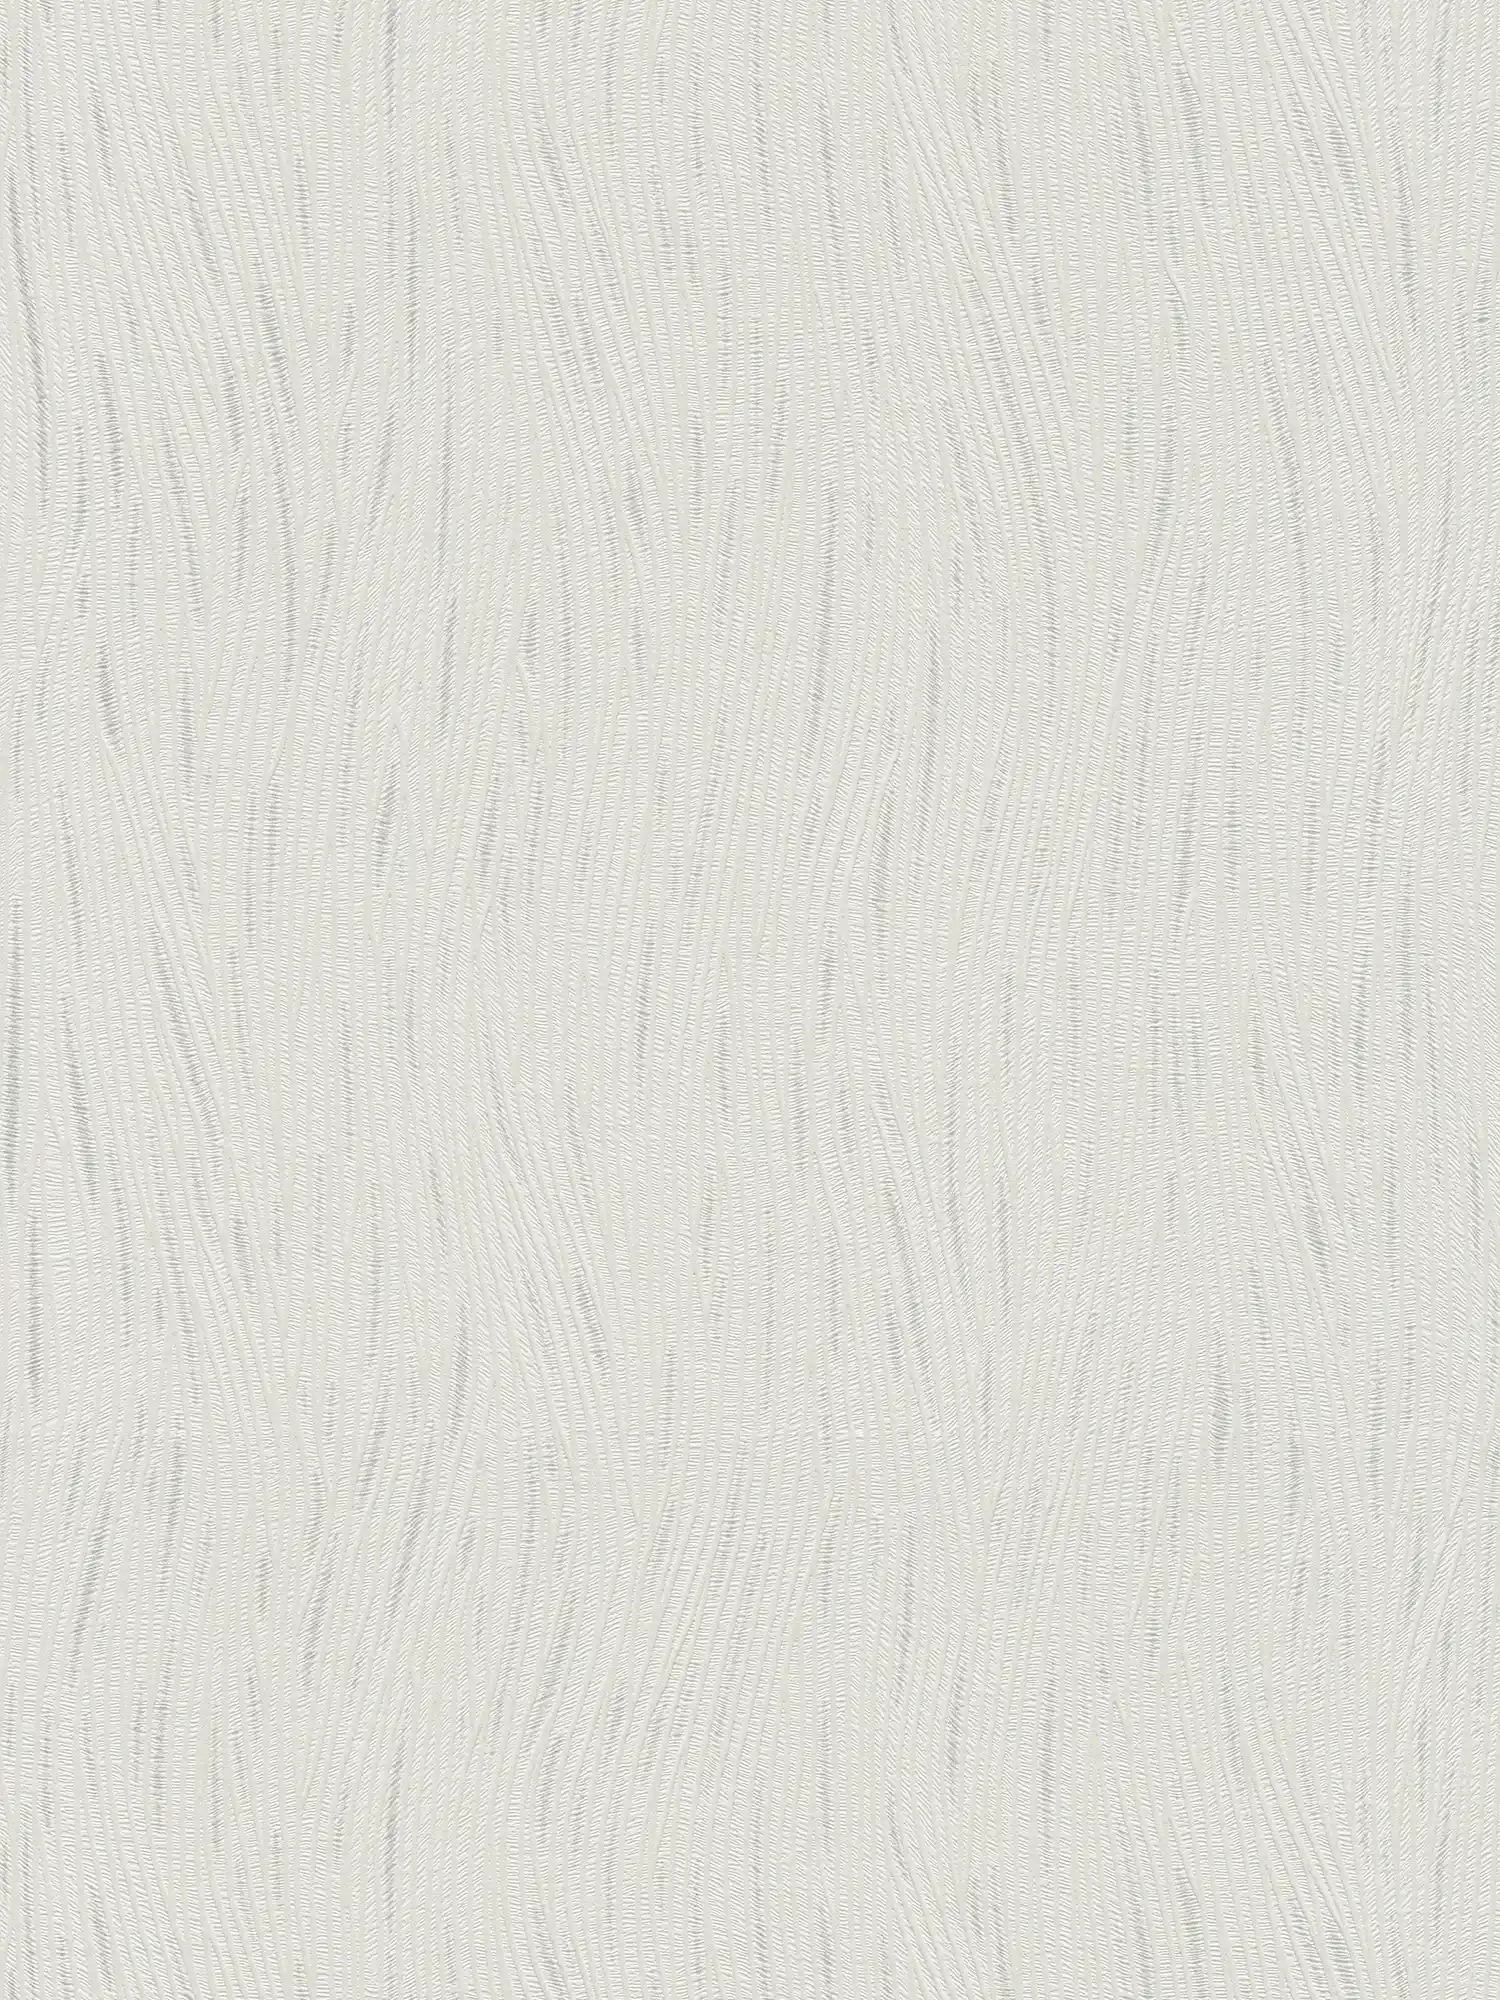 Graphic wallpaper wave pattern and metallic accents - white, silver
